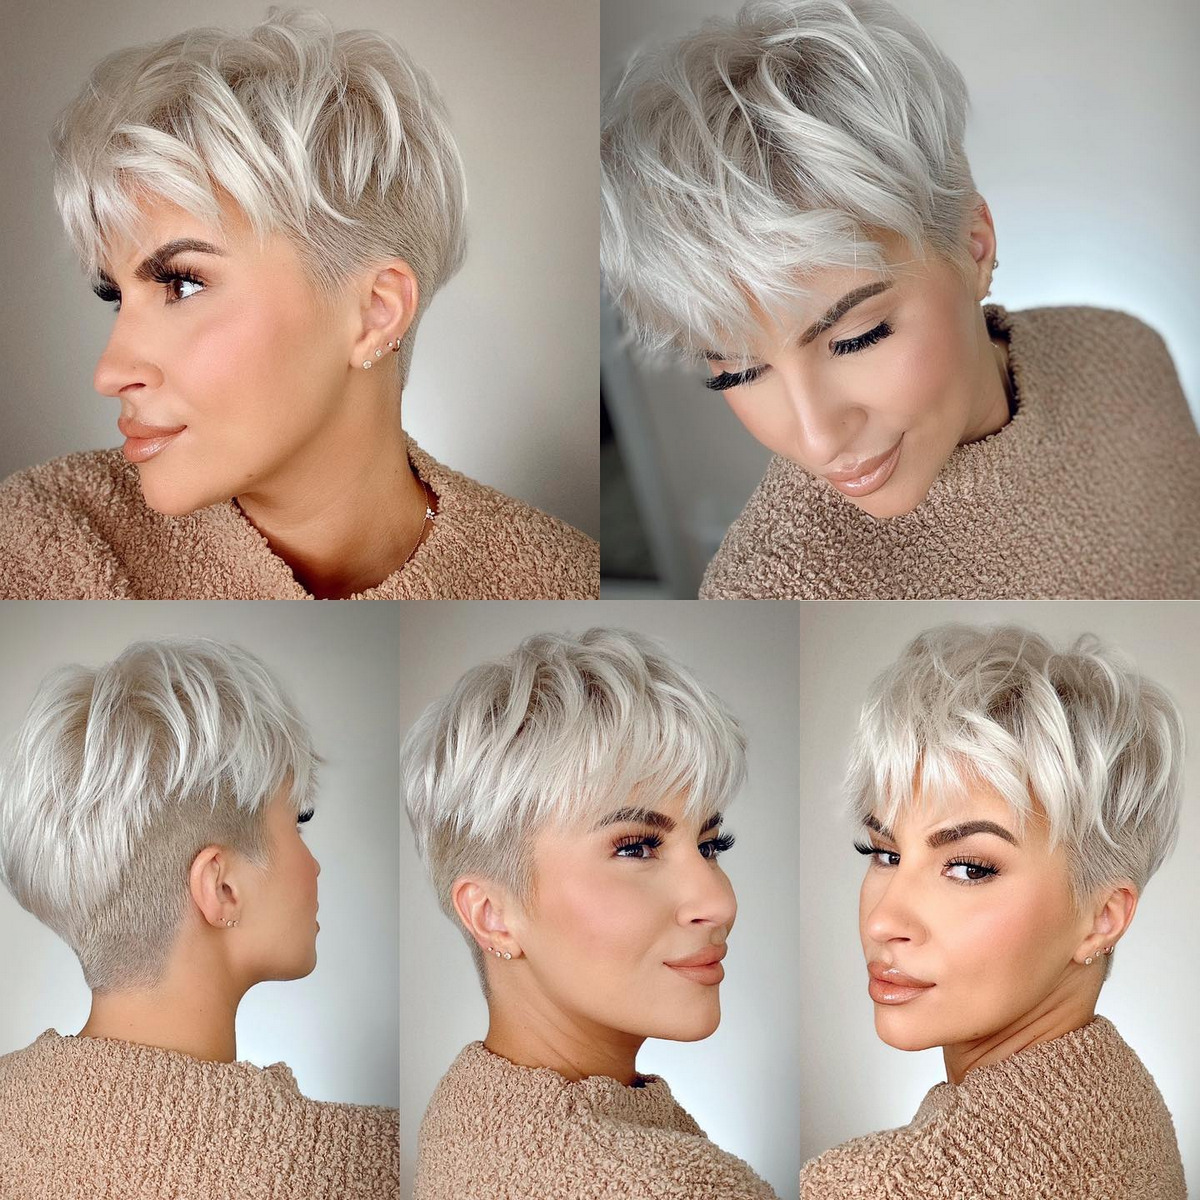 21 Stylish Short Pixie Cuts and Hairstyles in 2023 - Hairstyles Weekly